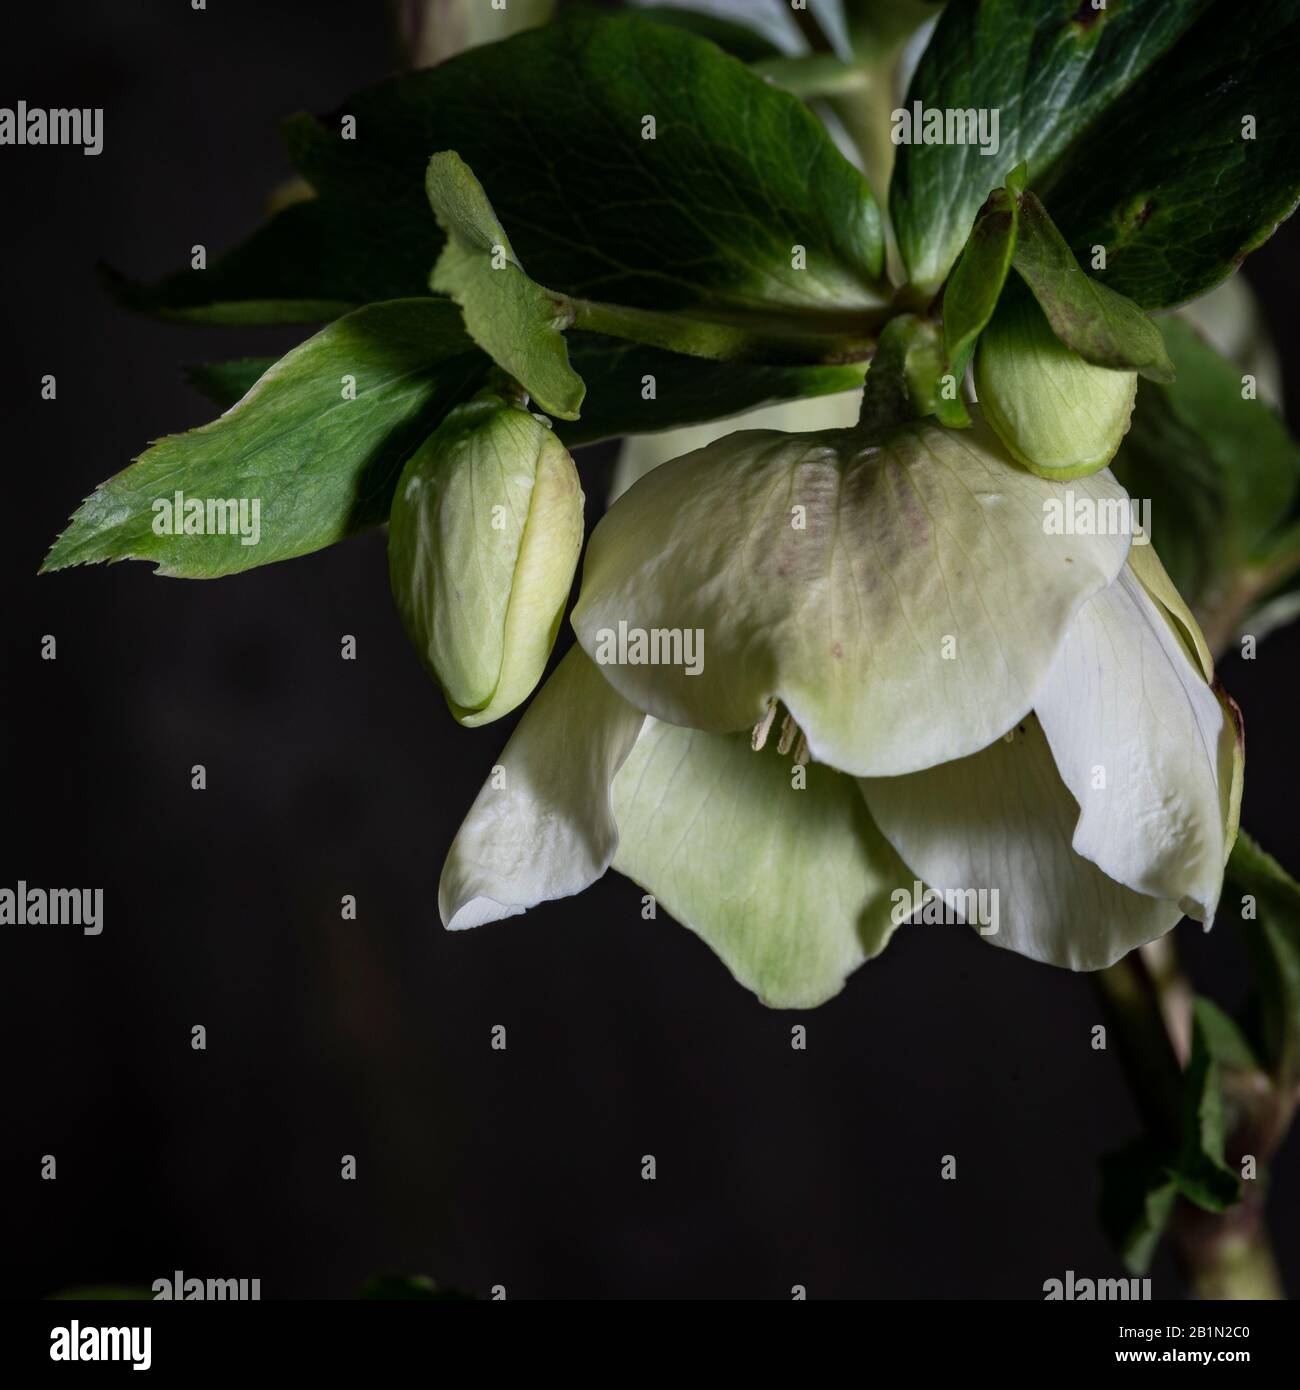 White Hellebore (Helleborus niger) flower and buds, otherwise known as Lenten Rose or Christmas Rose, against a dark background Stock Photo